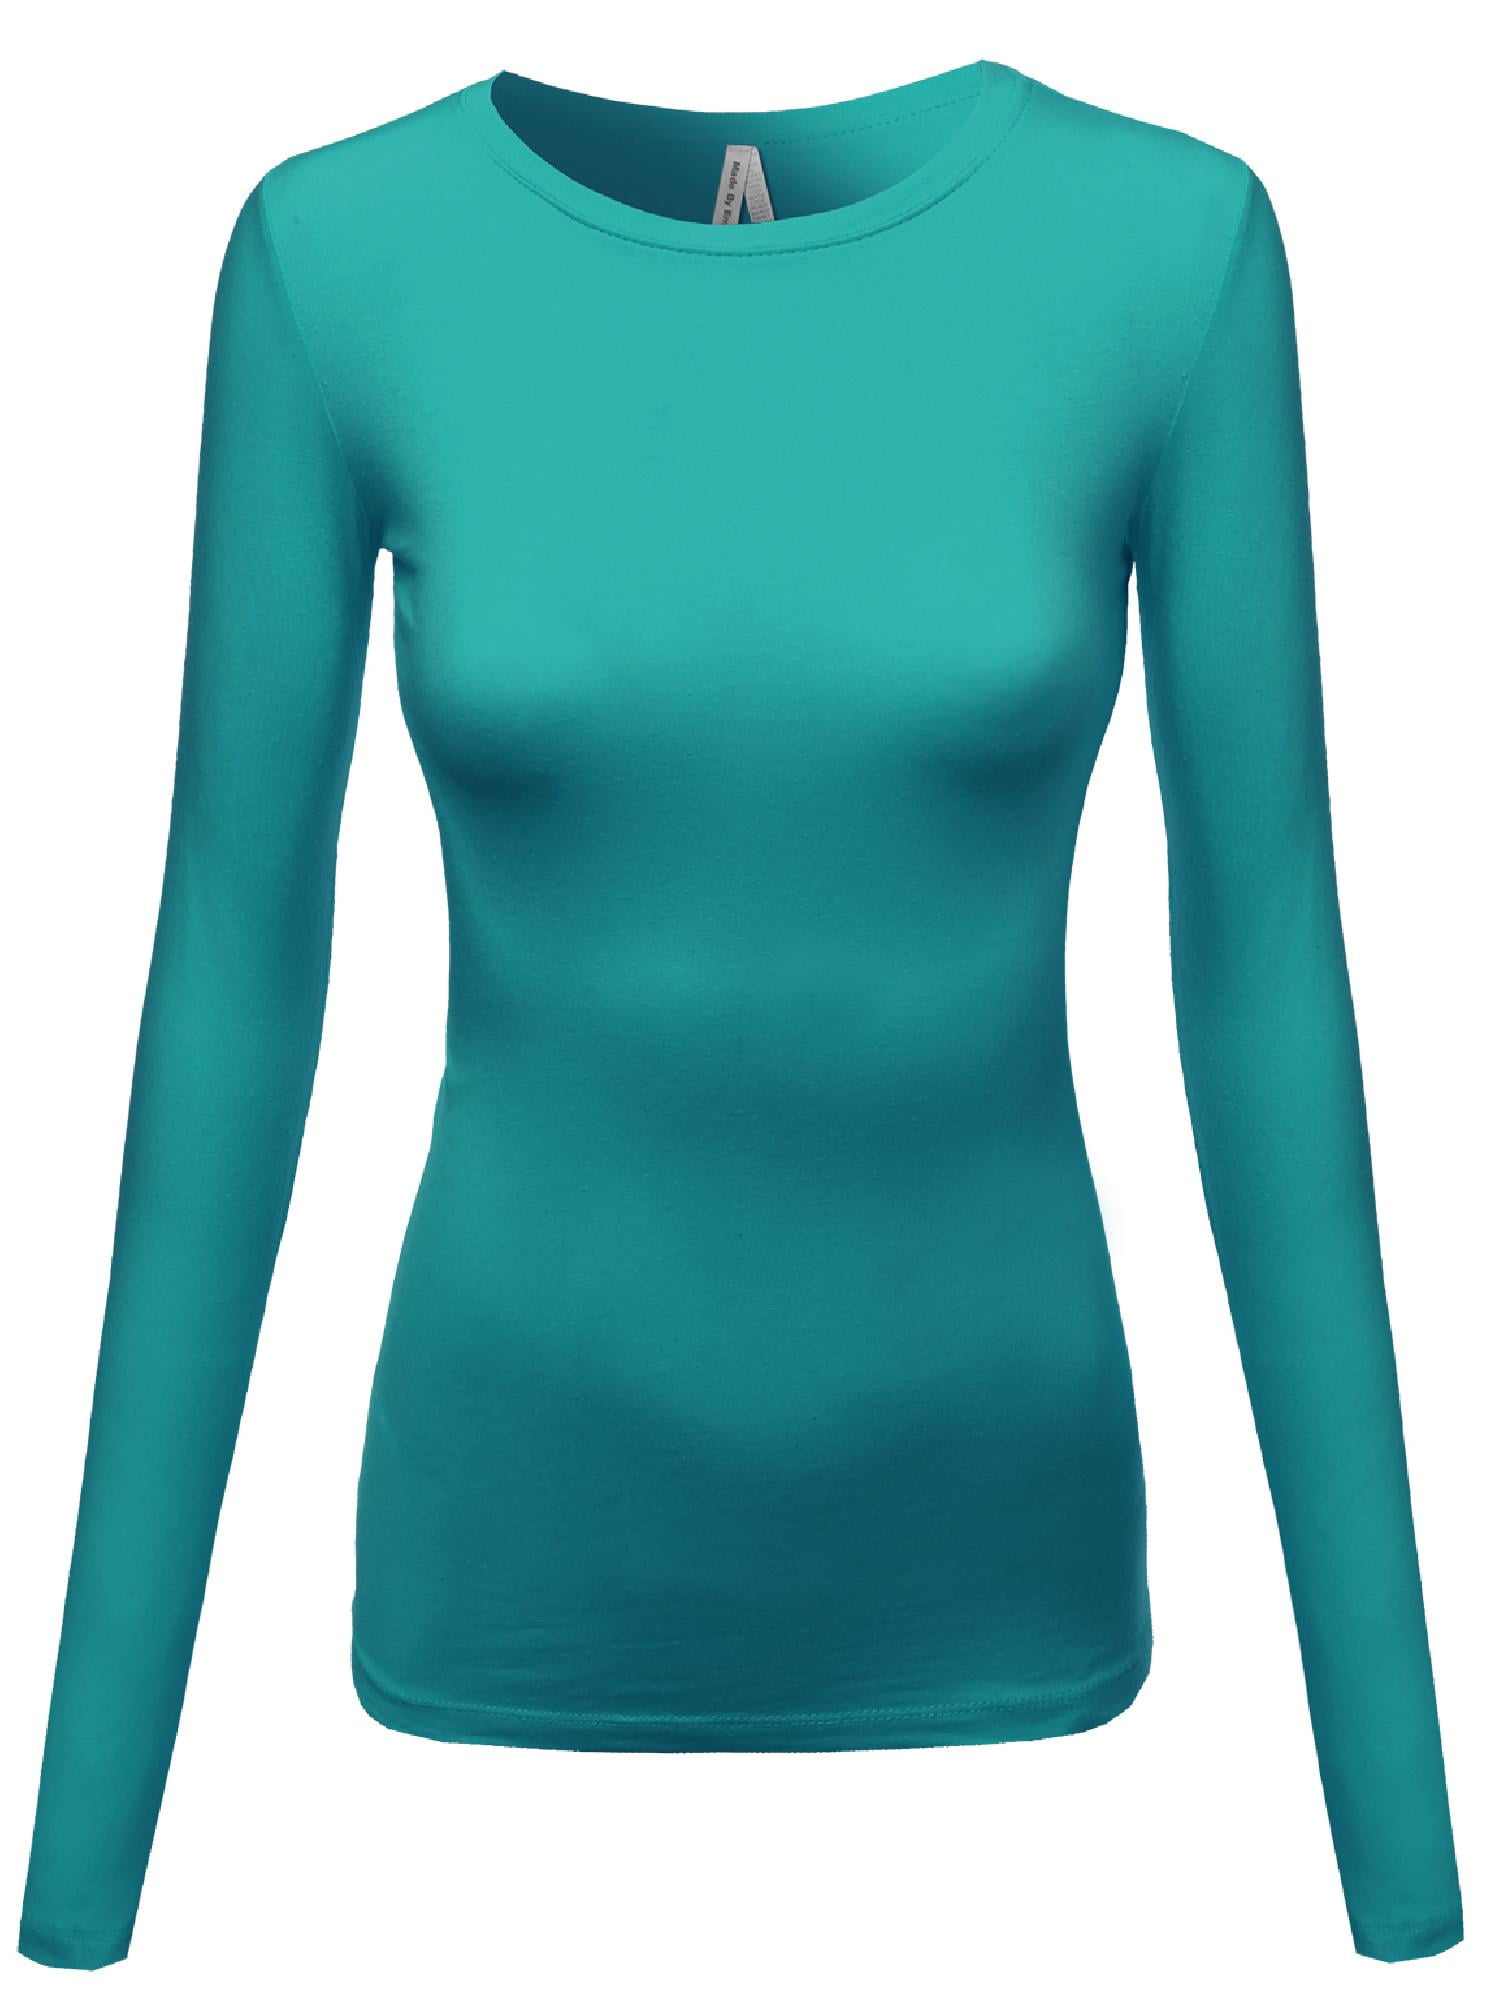 M&S 10 Thermal Everyday Warmth Long Sleeve Heatgen top soft light base blue NEW 